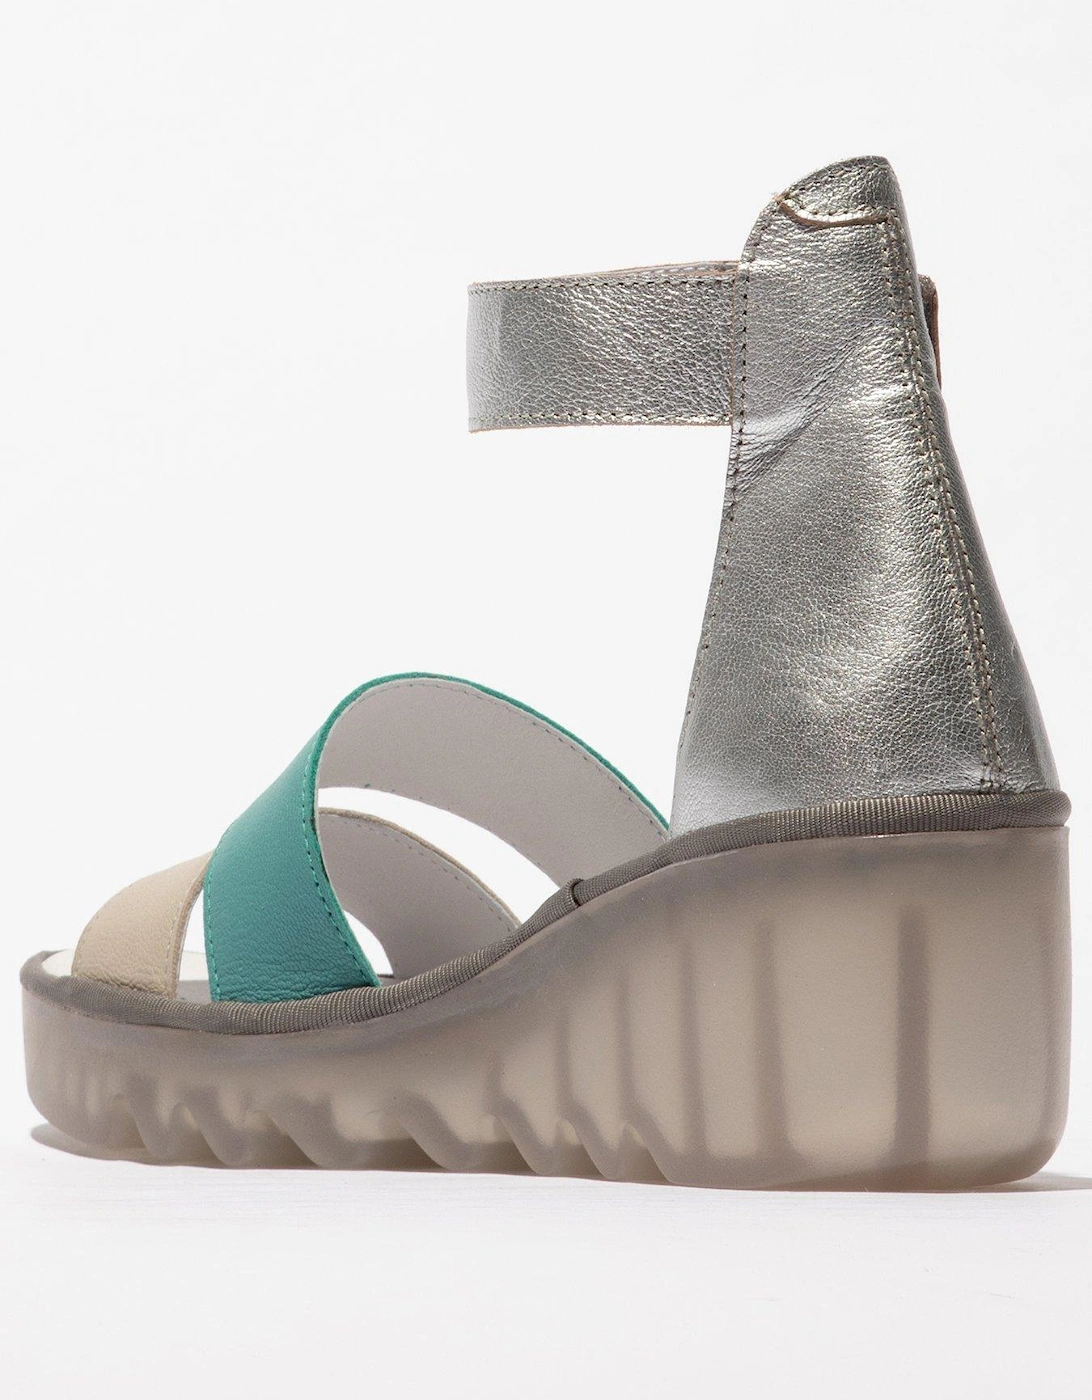 Bono Double Strap Leather Wedged Sandal - Silver & Turquoise